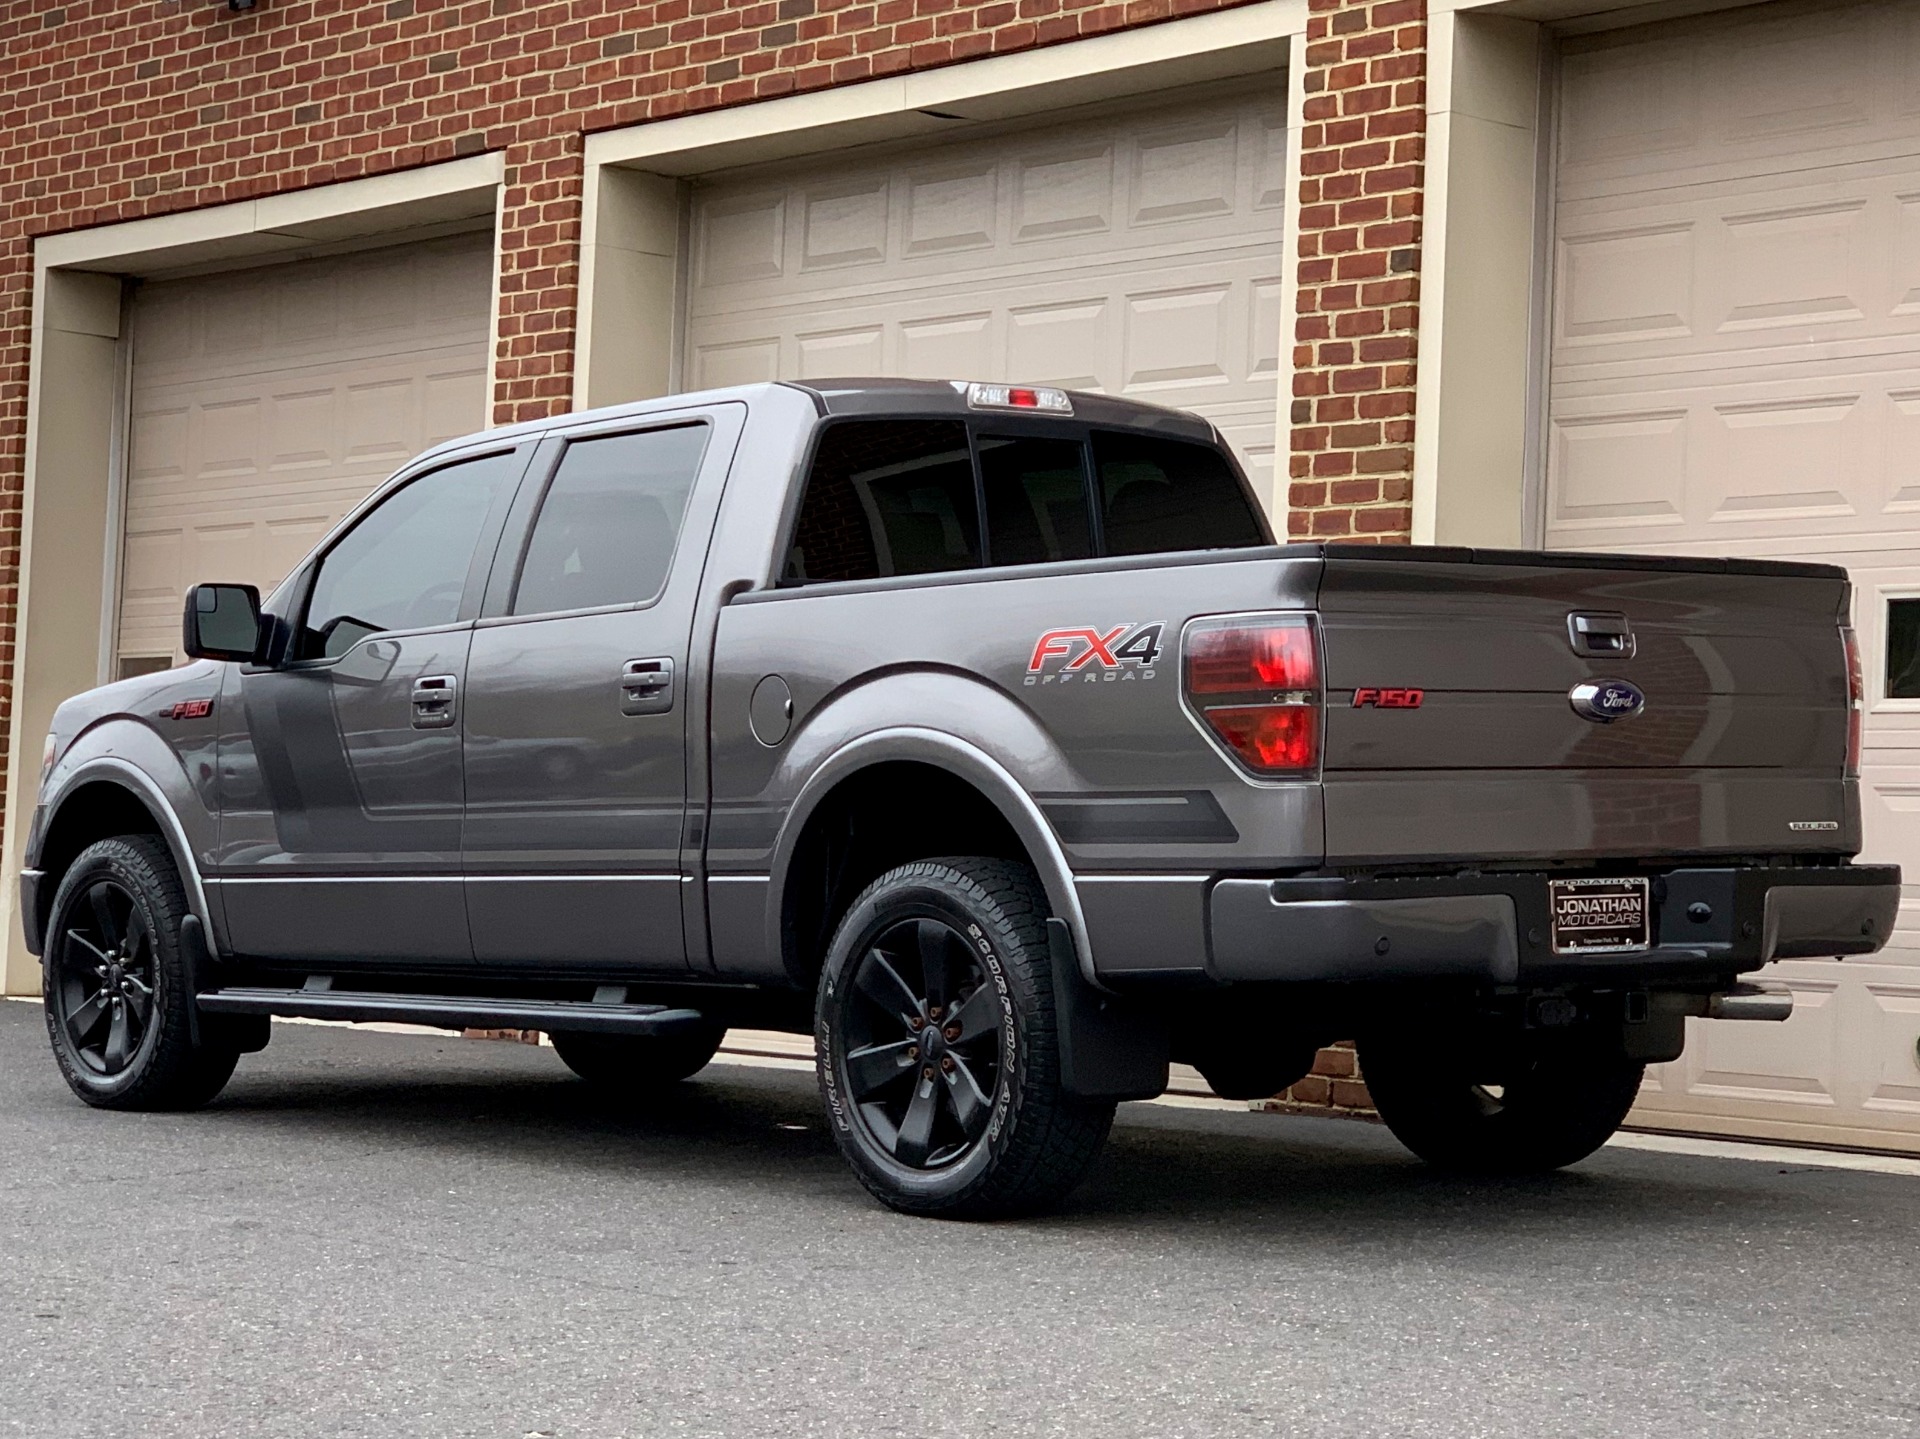 2014 Ford F-150 FX4 Appearance Package Stock # C44611 for sale near